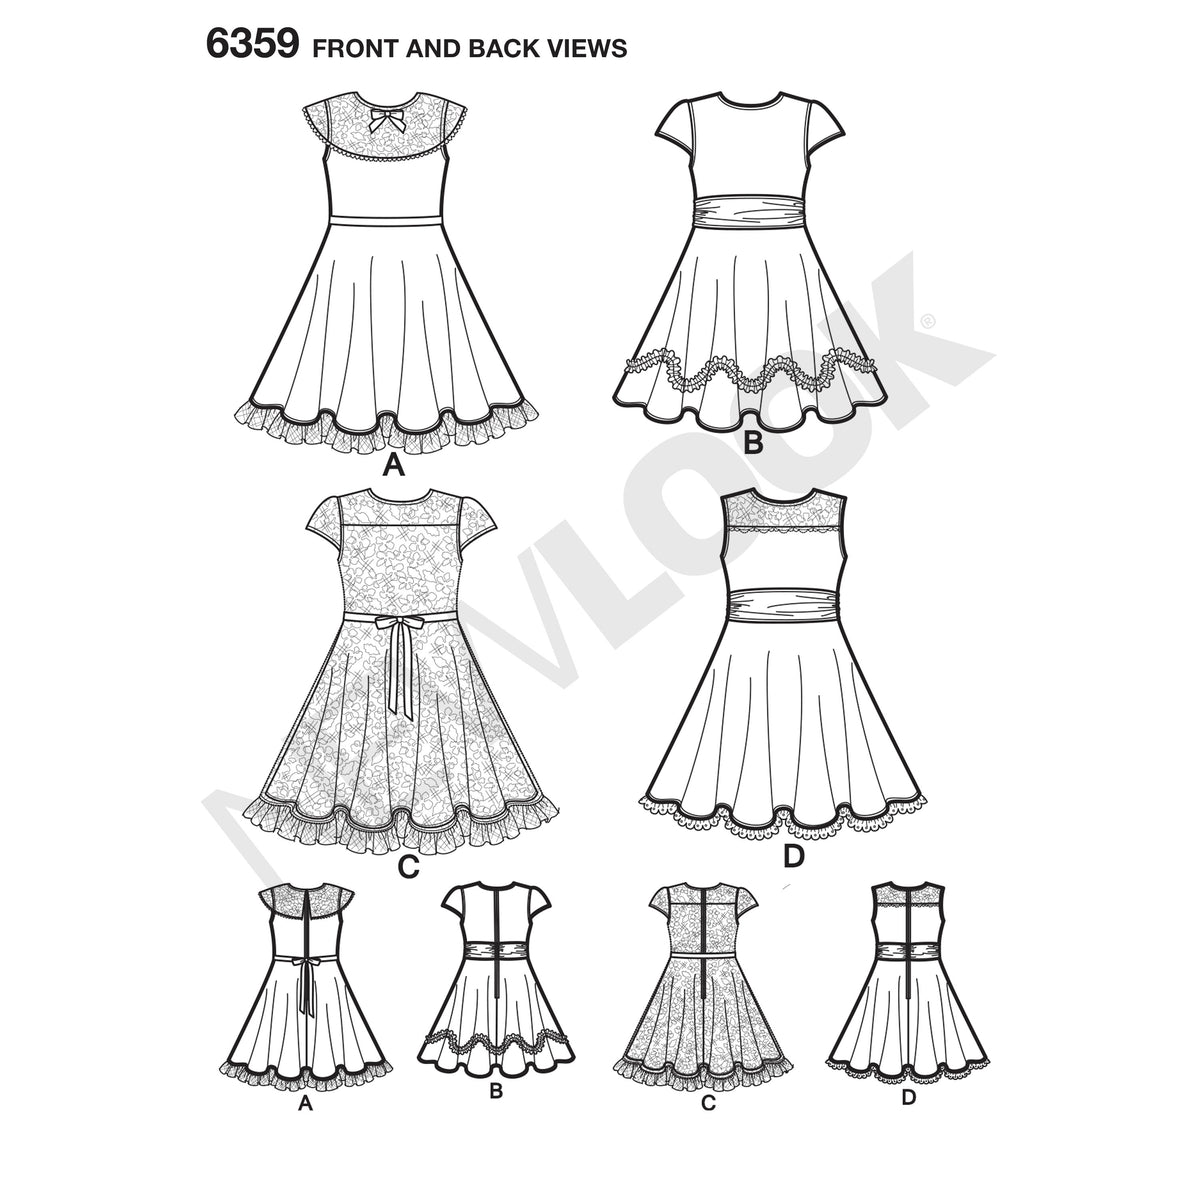 6359 Child's Dresses with Lace and Trim Details